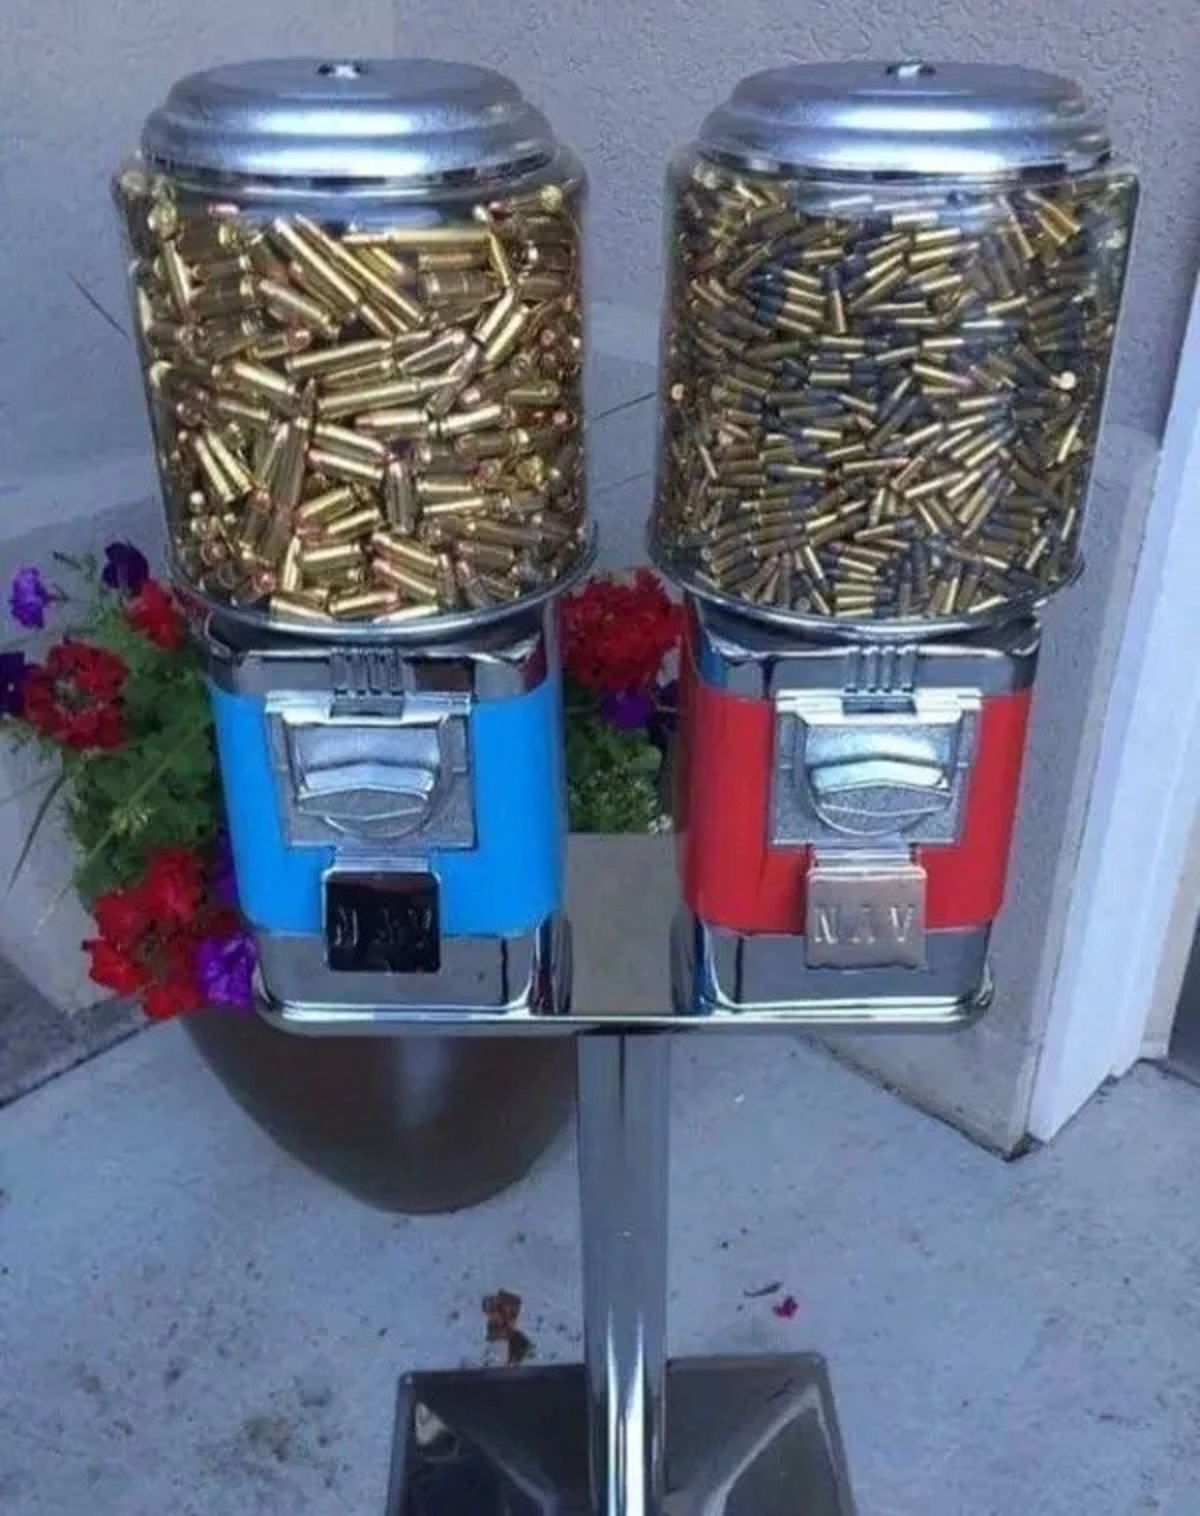 gumball machine with bullets